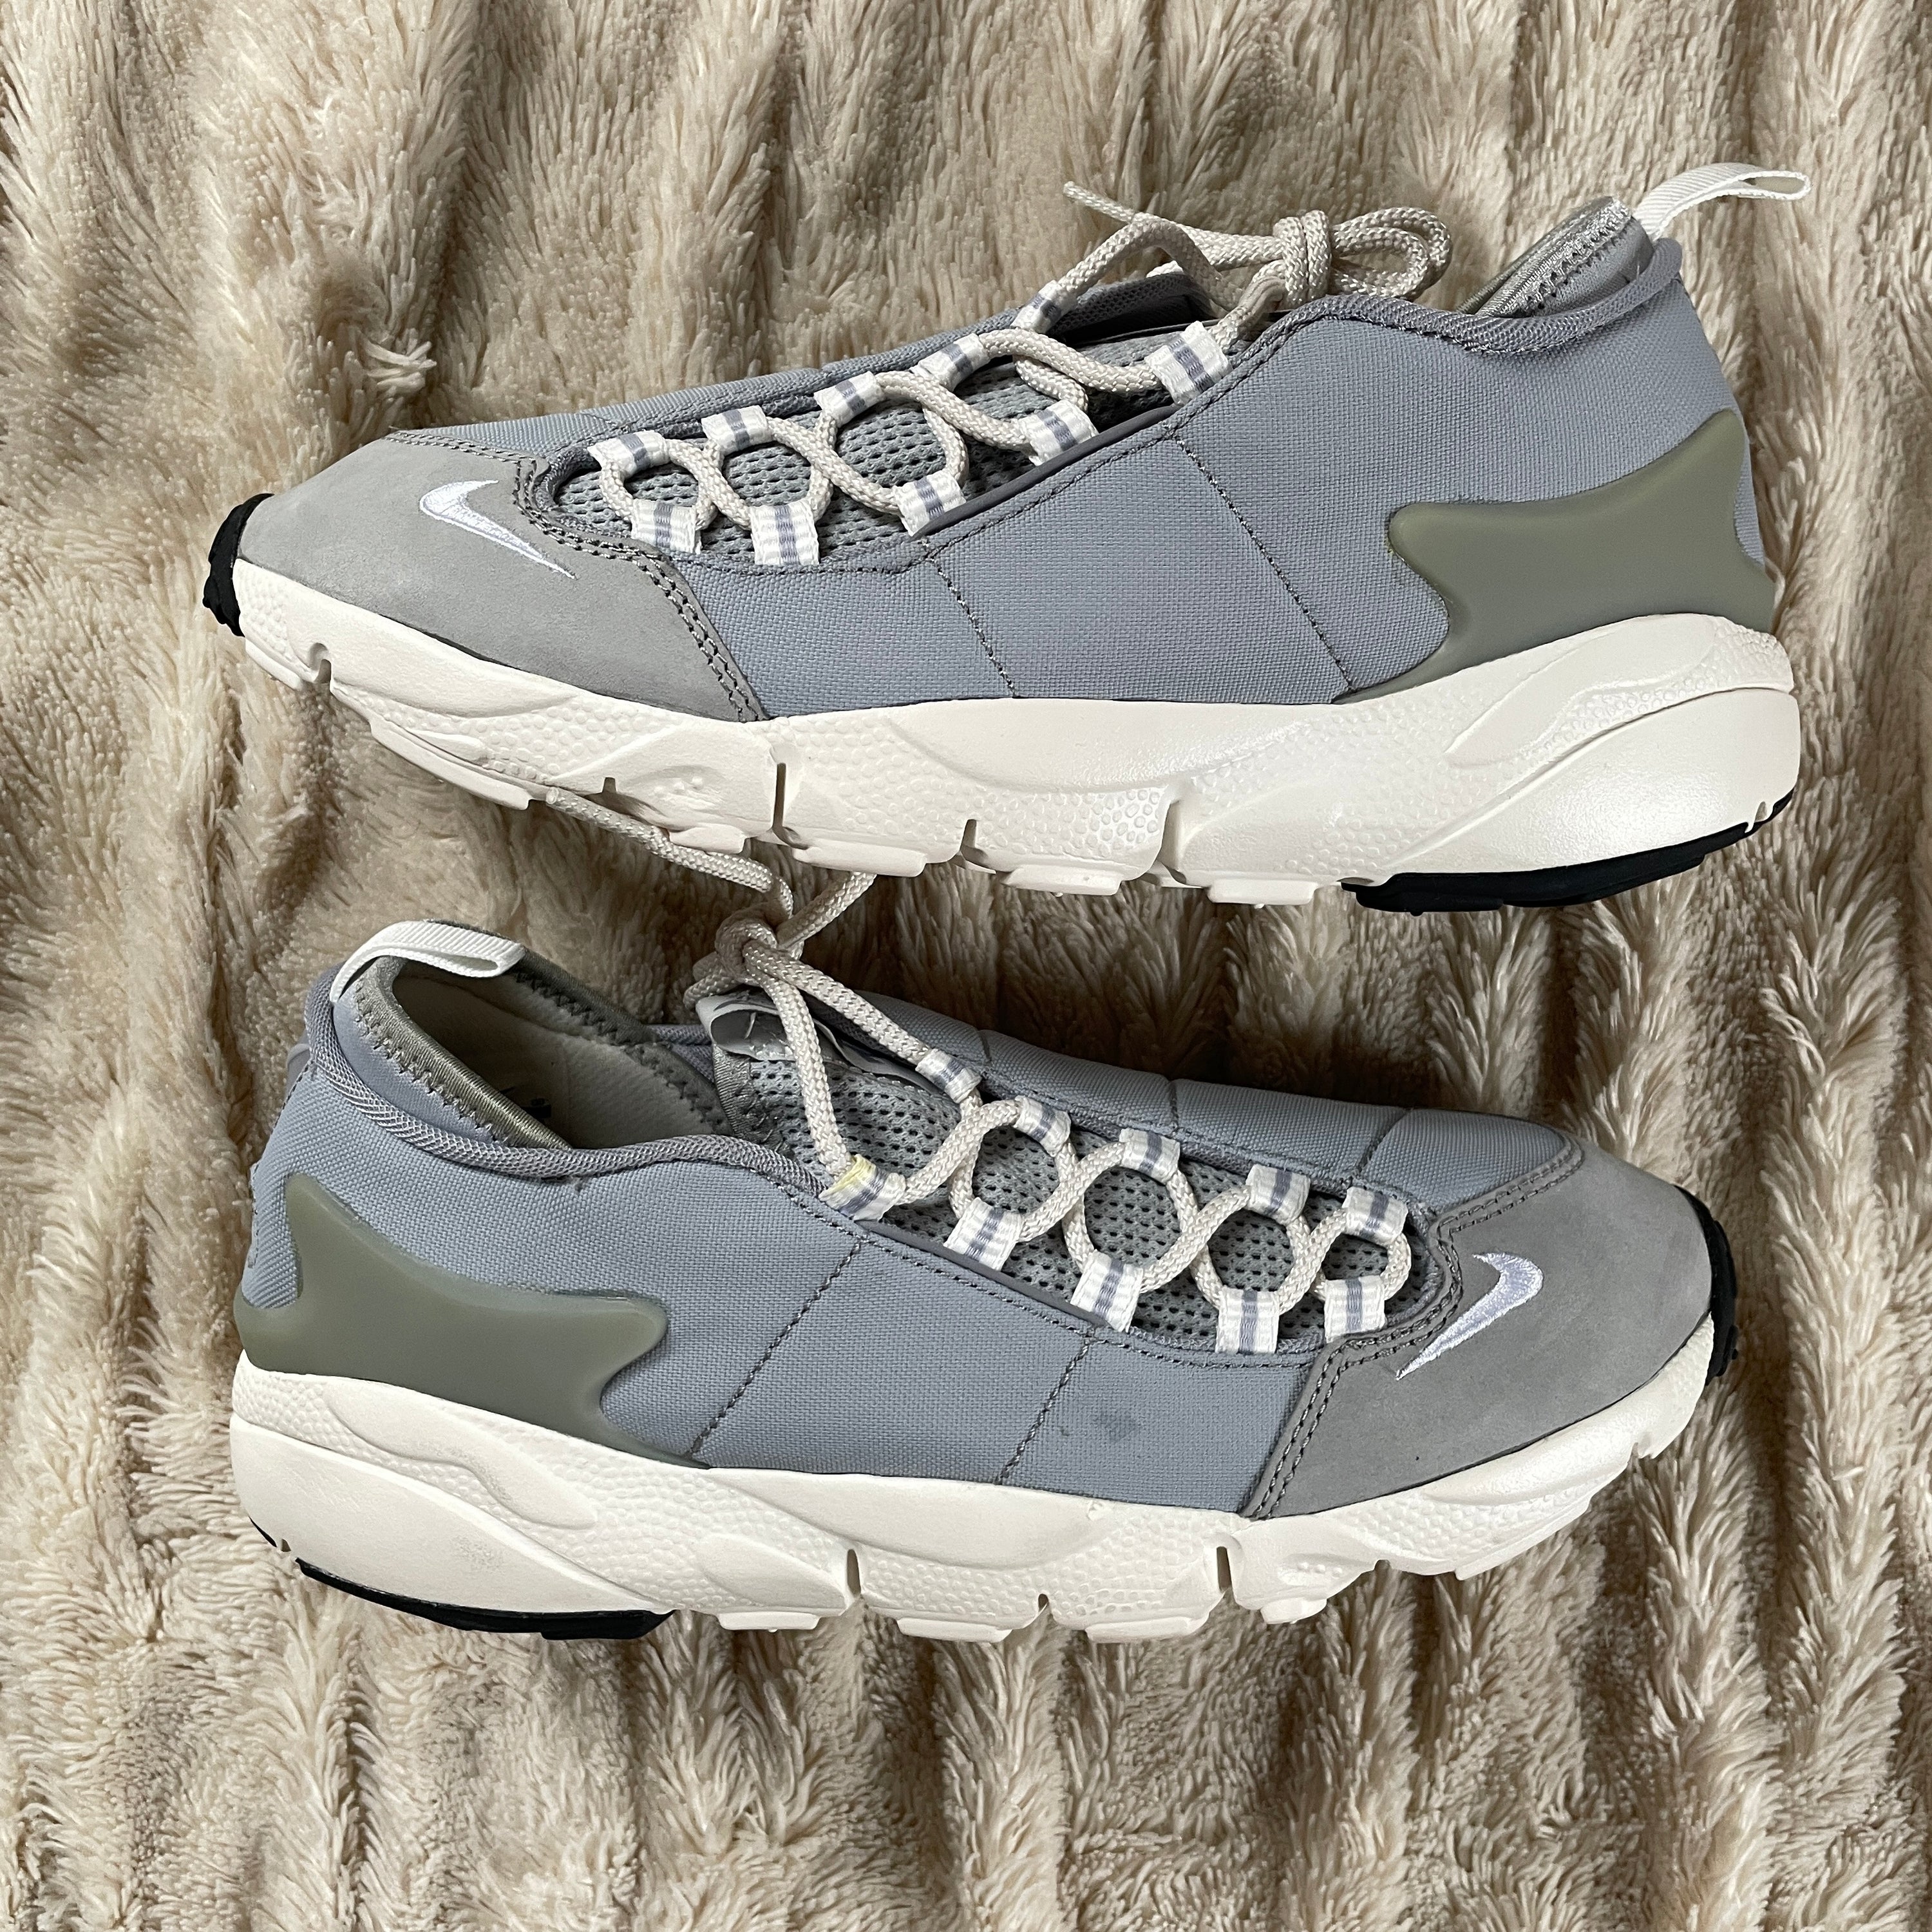 US 8 - NIKE AIR FOOTSCAPE NM "WOLF GREY" [2016]